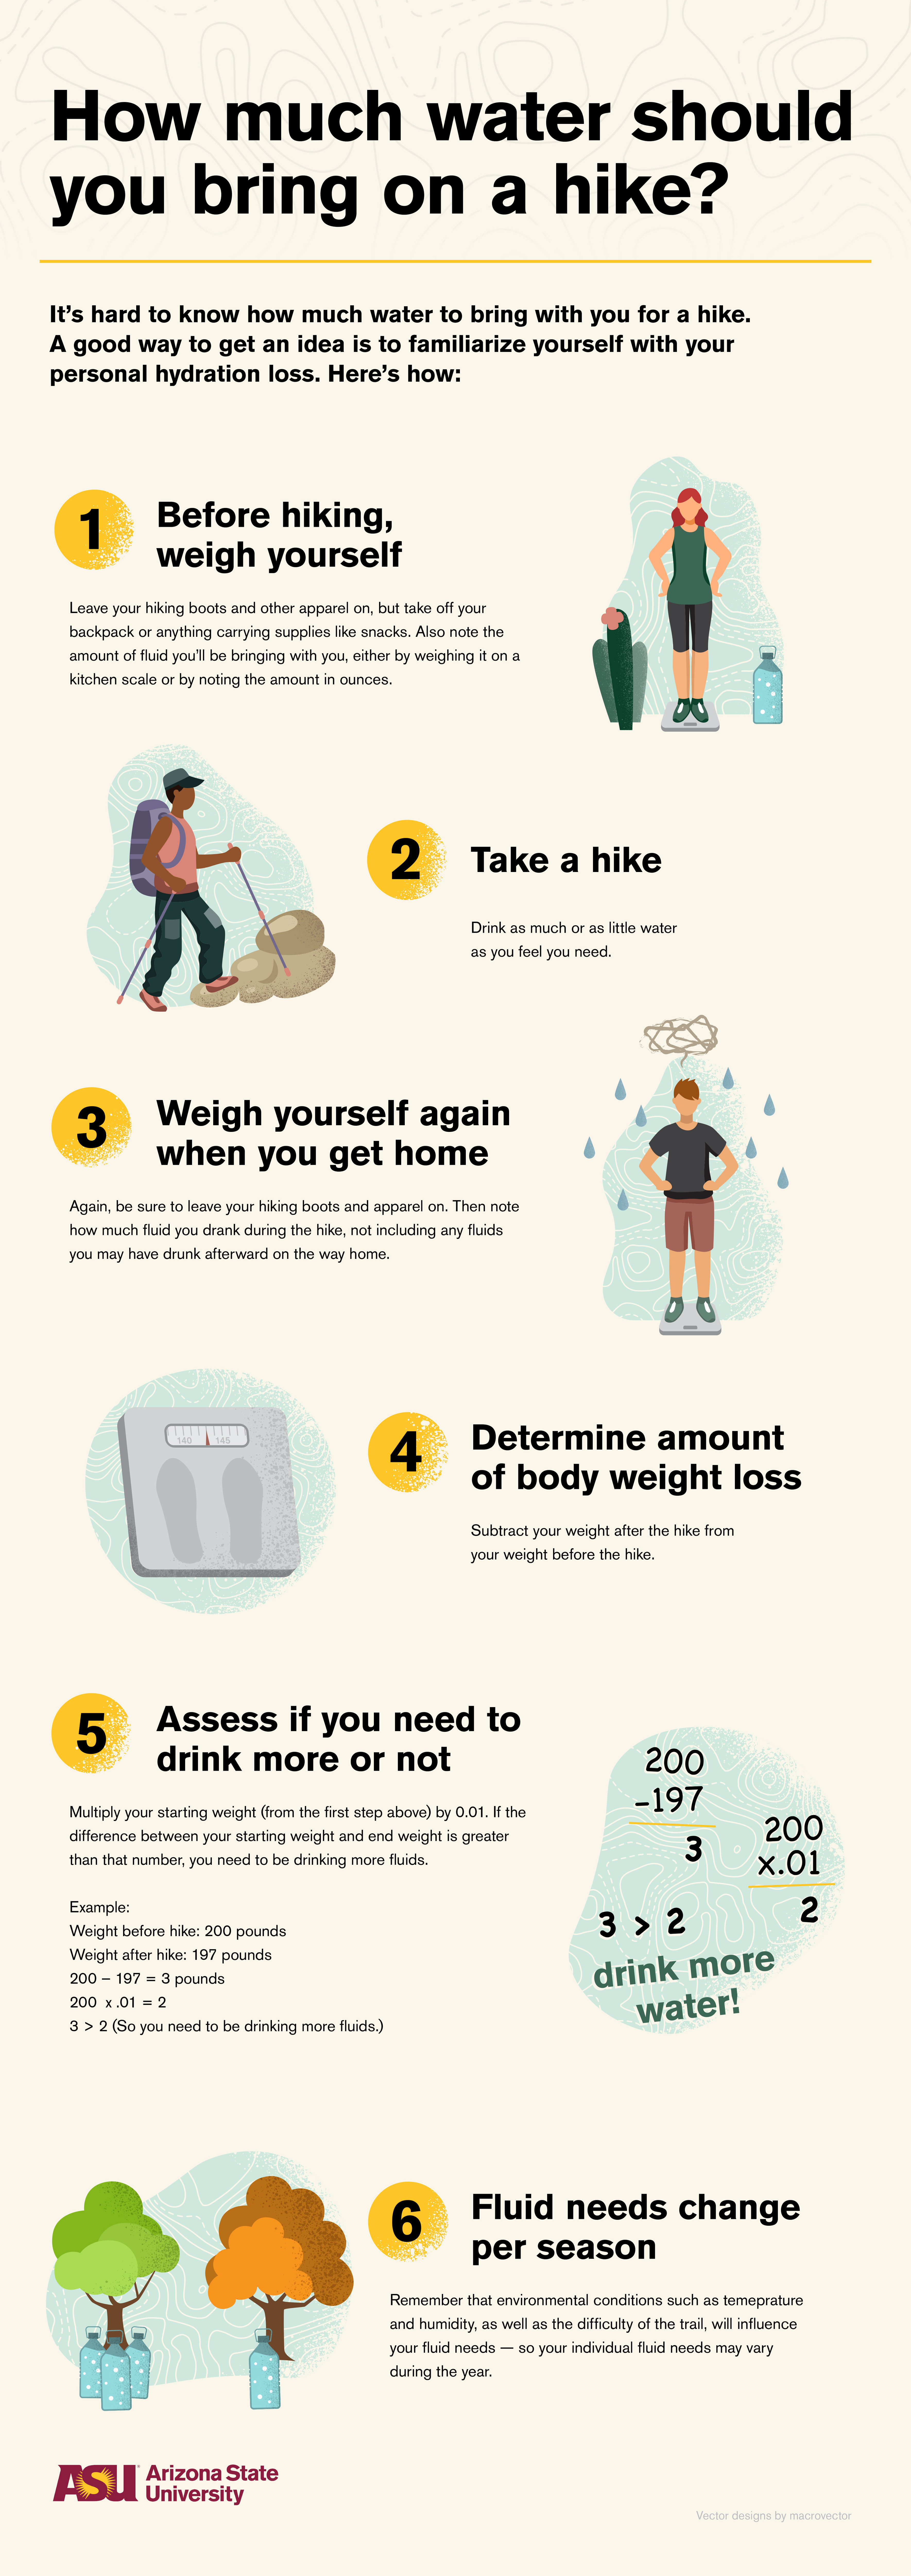 Hydration plan for hikers